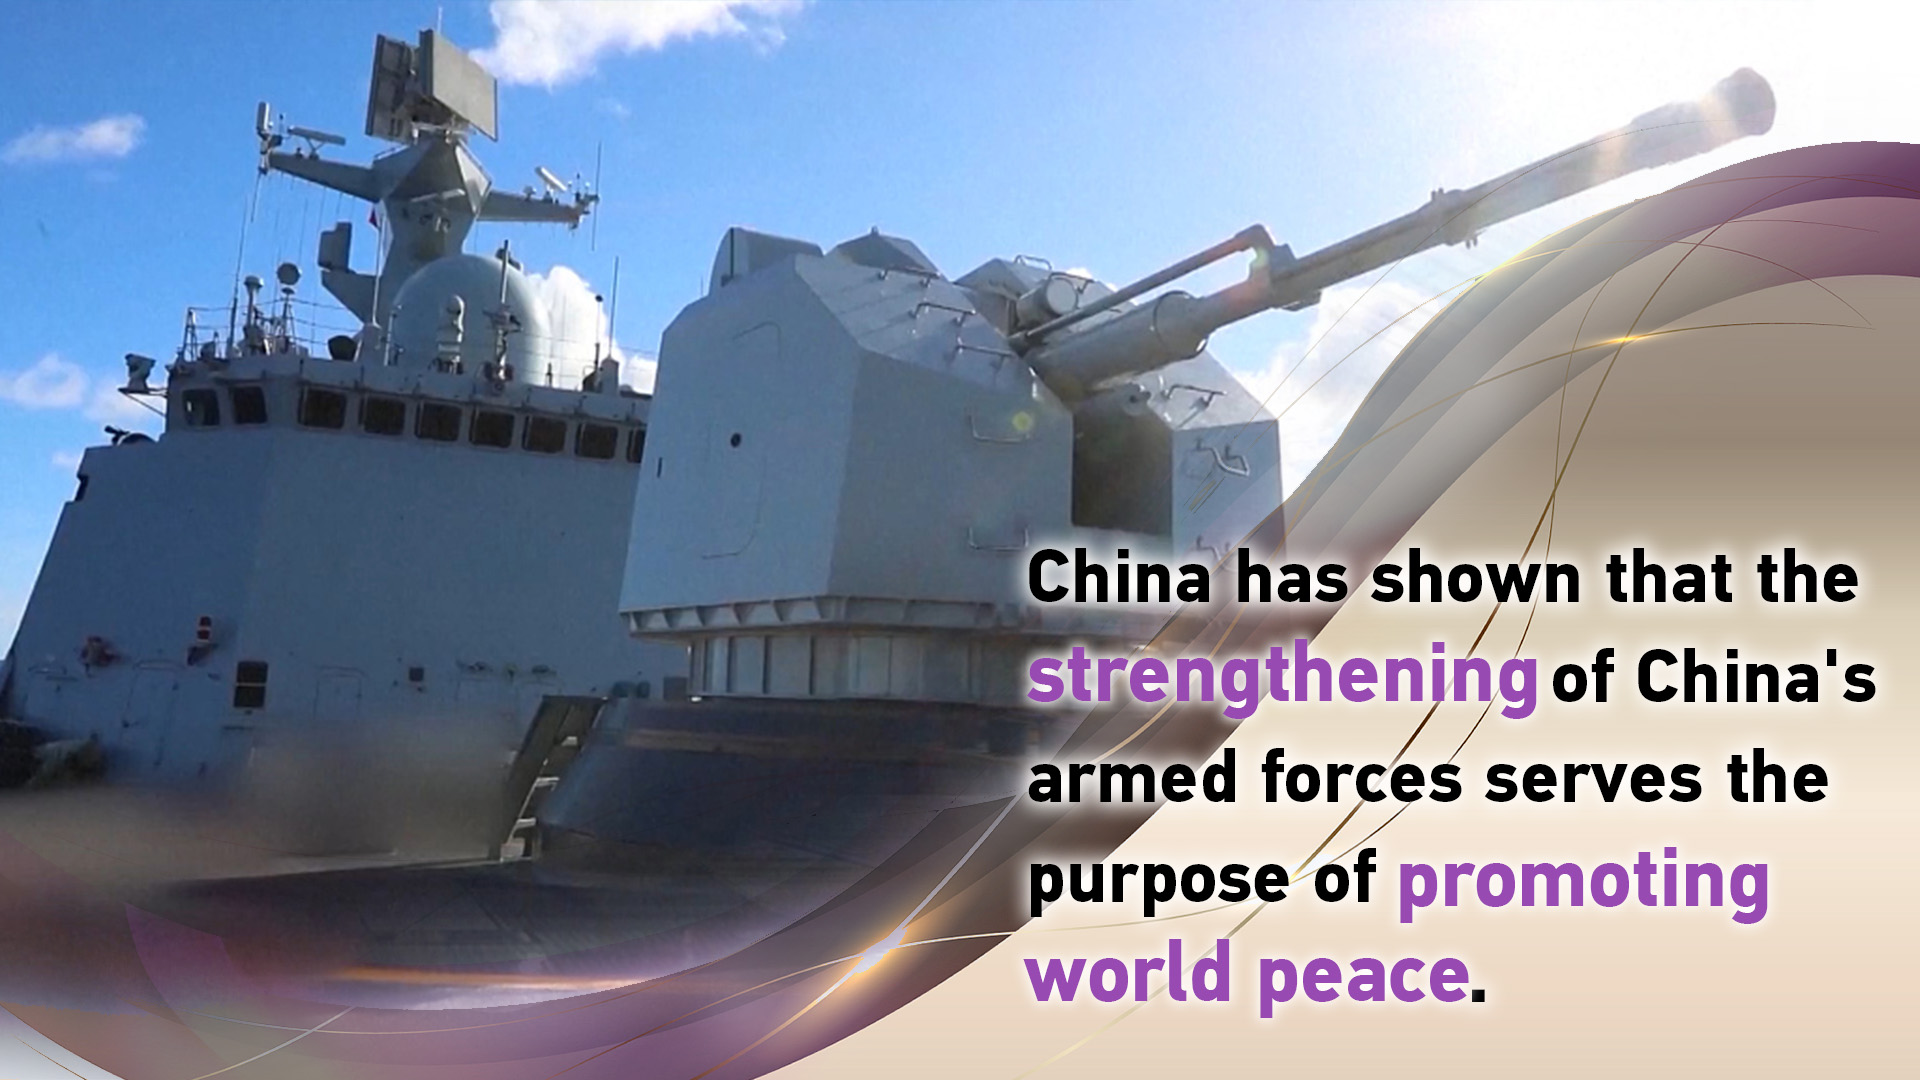 A powerful Chinese military contributes to global stability